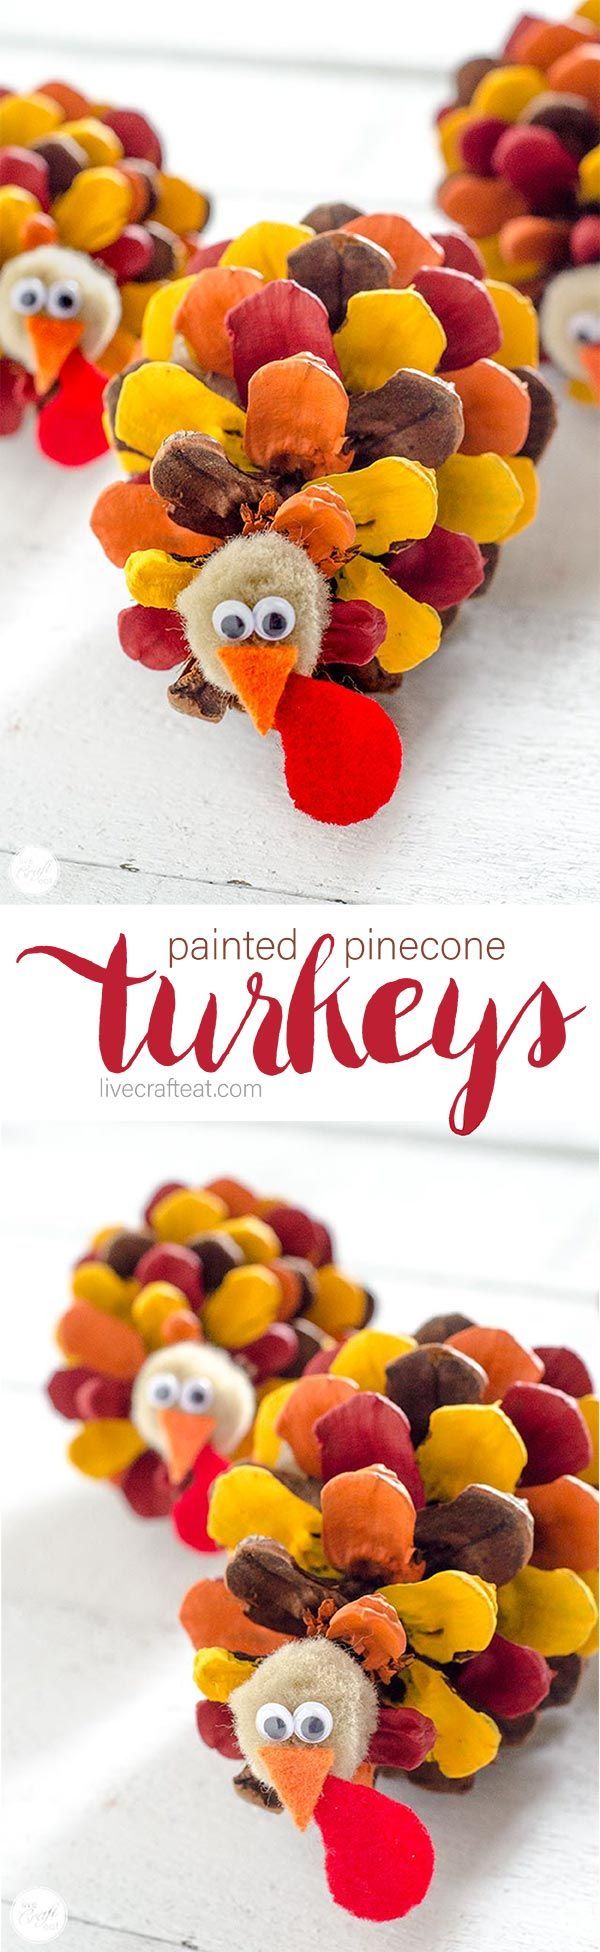 painted pinecone turkeys :: perfect thanksgiving craft for kids, and great as place card holders, or just as cute thanksgiving